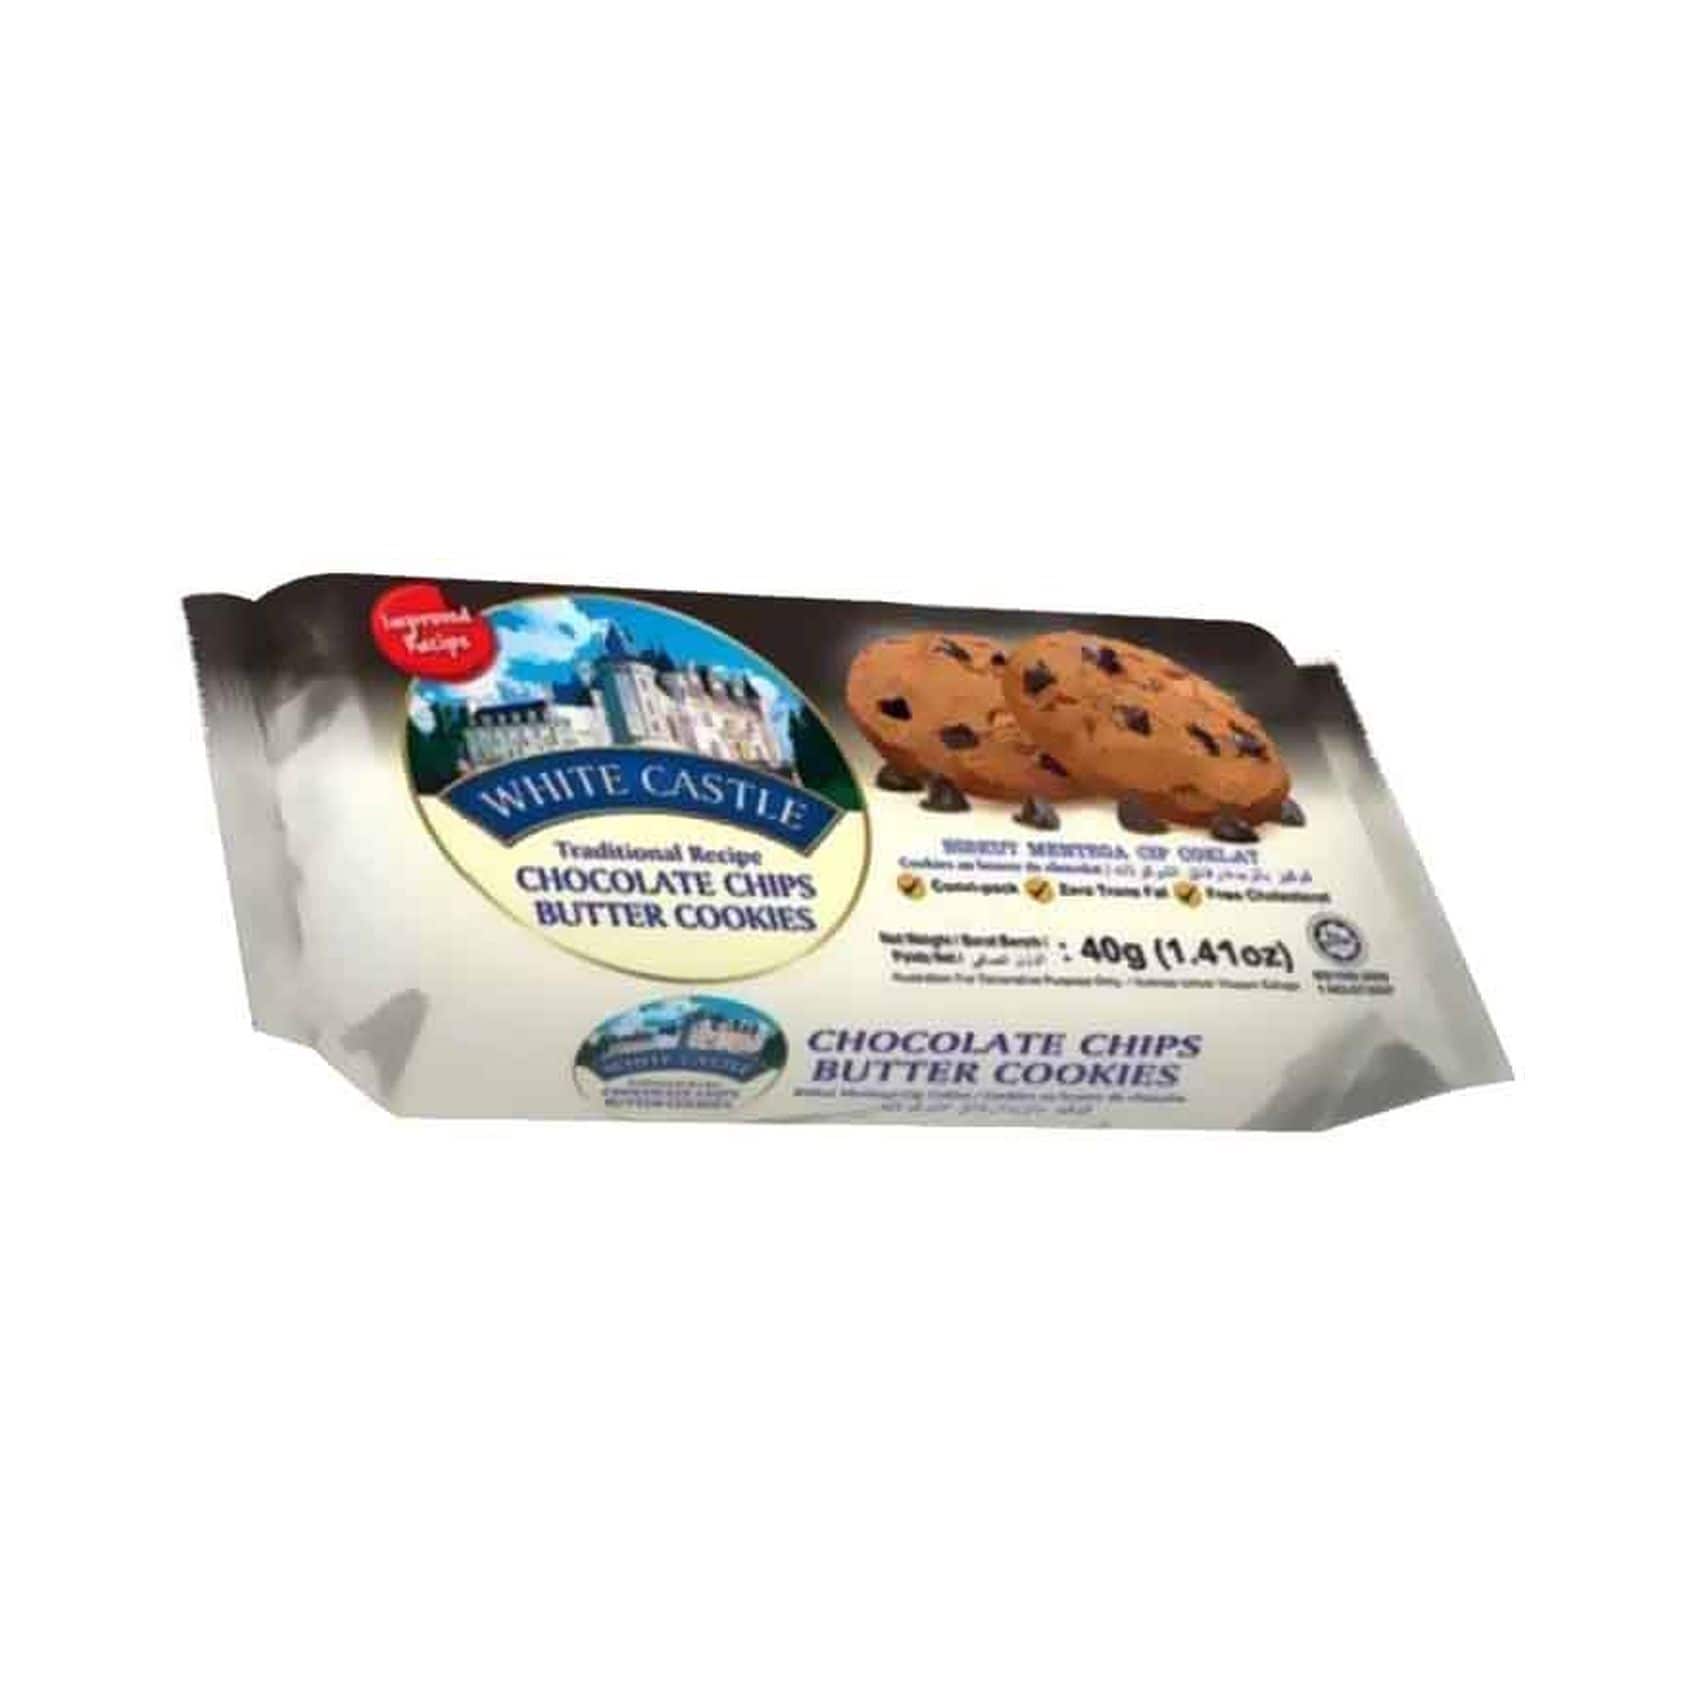 White castle butter cookies